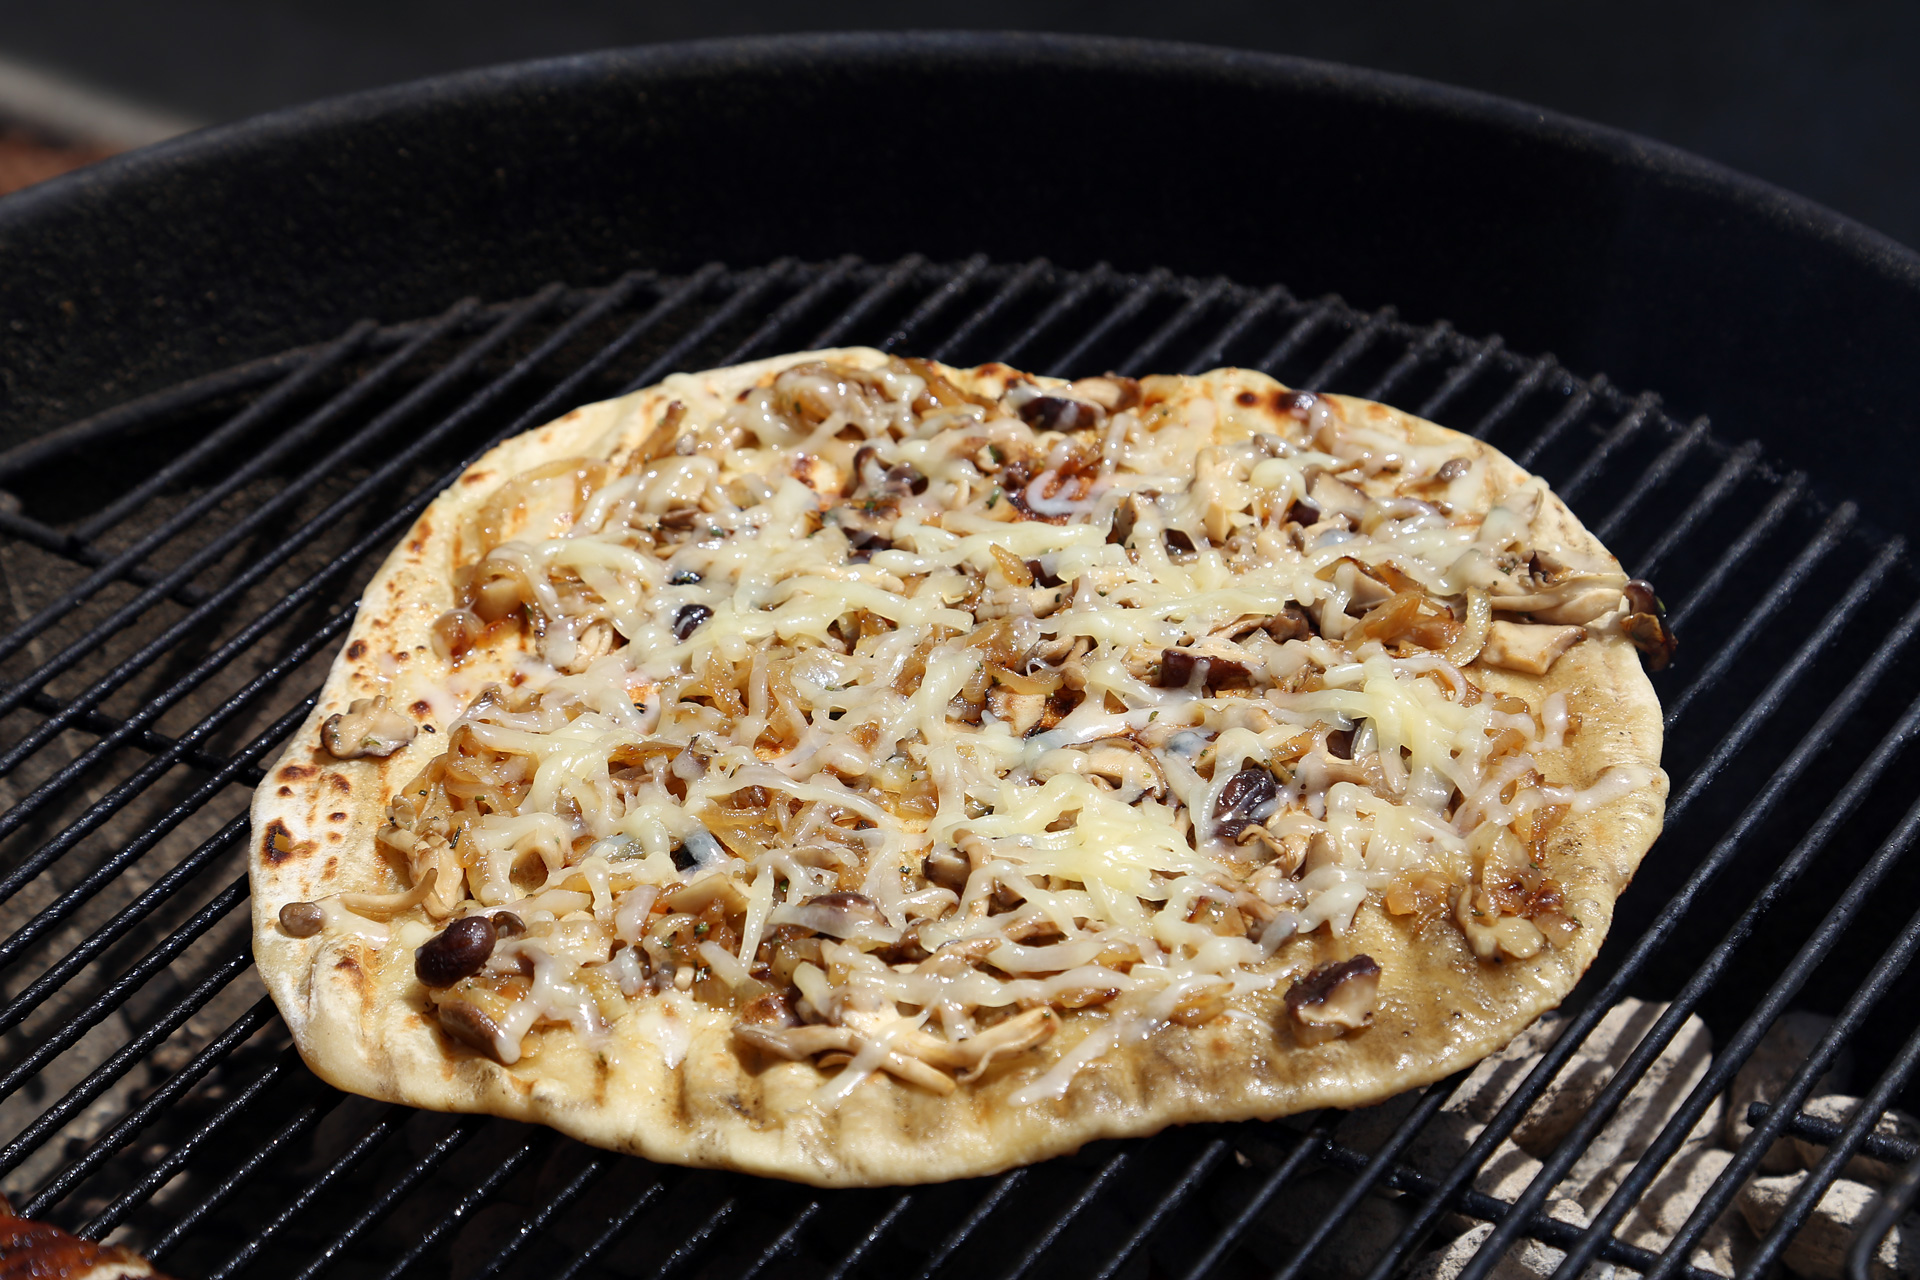 Cover the grill and let cook until the cheese is melted and bubbly and the dough is cooked through, rotating the pizza every so often to avoid hot spots and burnt pizza.